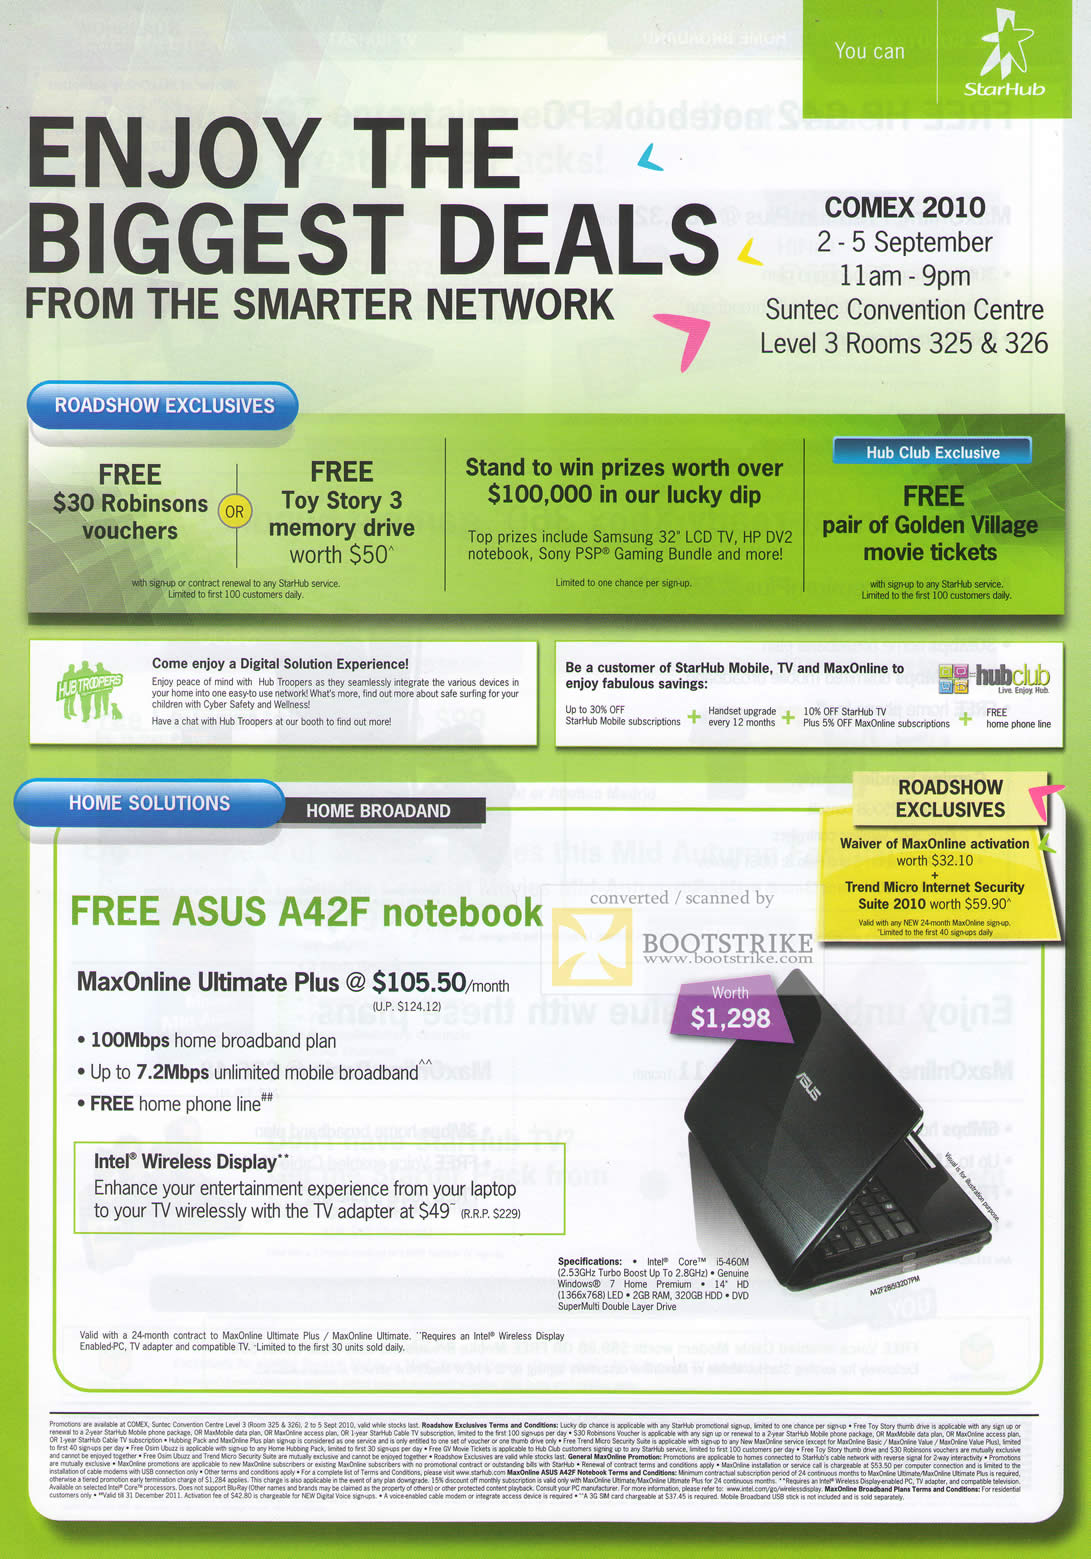 Comex 2010 price list image brochure of Starhub Roadshow Exclusives Robinsons Vouchers Toy Story 3 ASUS A42F Notebook Broadband MaxOnline Ultimate Plus